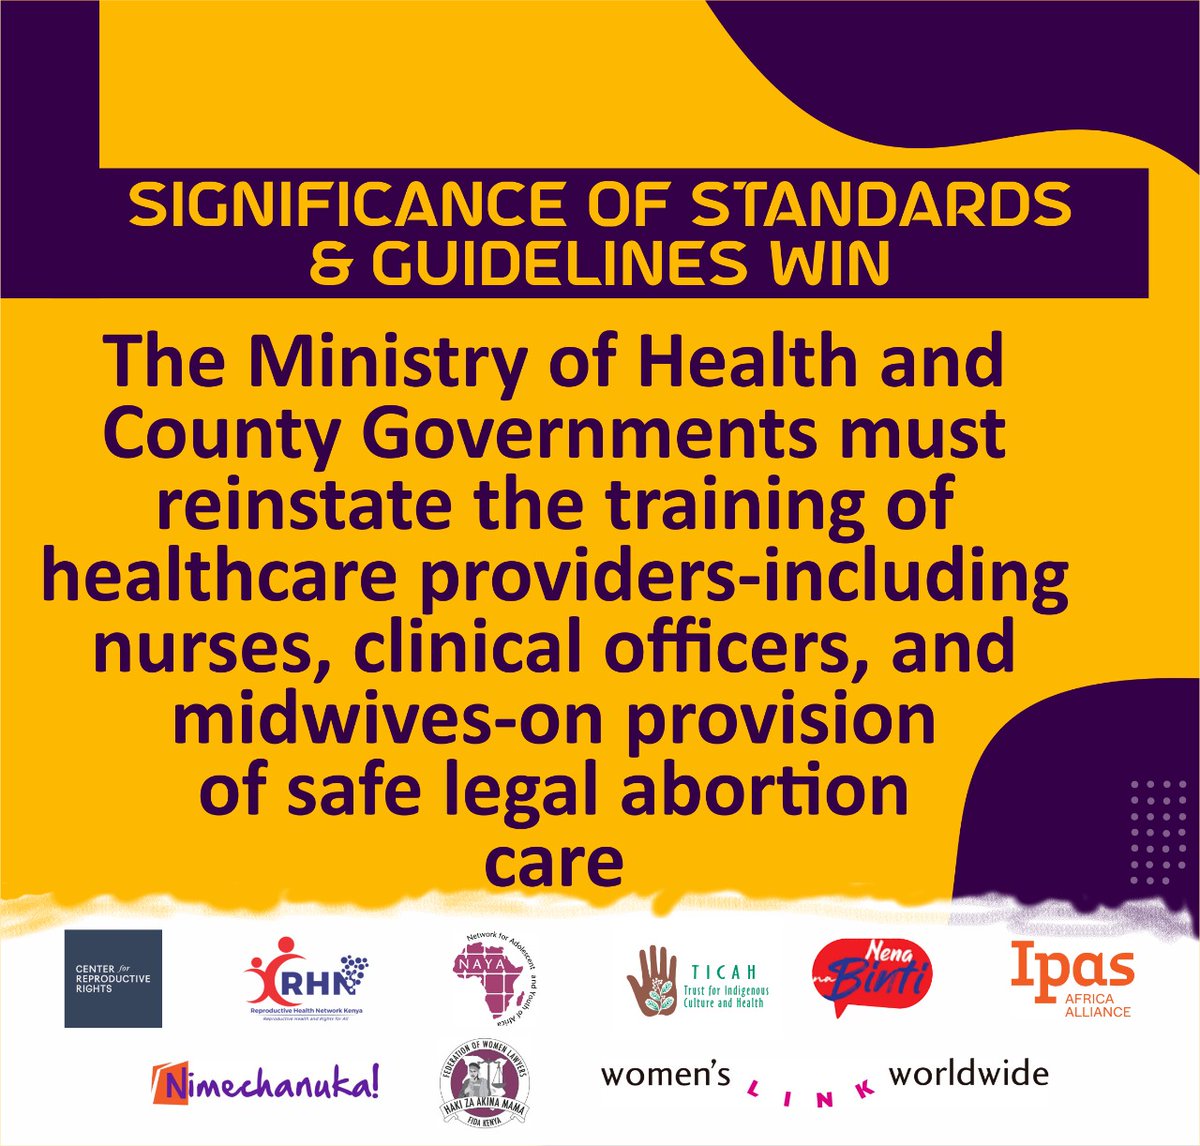 📖 The Ministry of Health (@MOH_Kenya) and County Governments (@KenyaGovernors) must reinstate the training of healthcare providers on provision of safe legal abortion care #DefendHerRightsKE